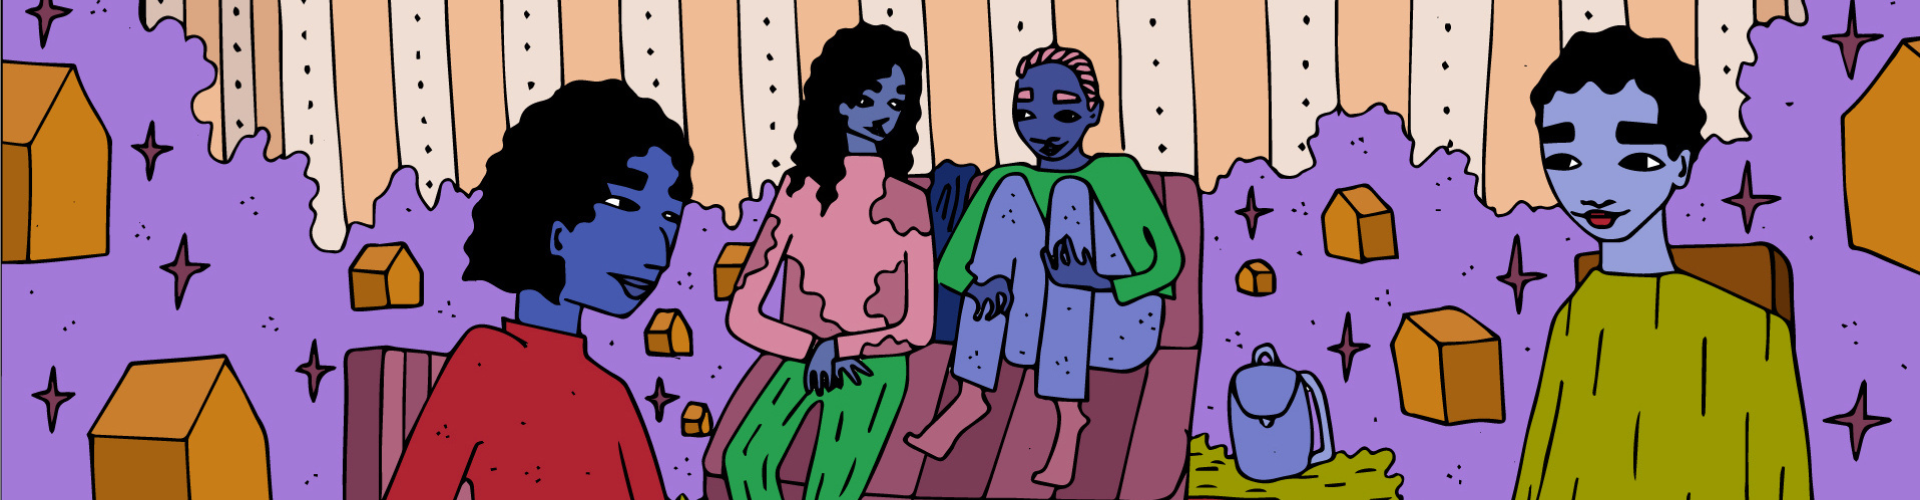 A colourful illustration of four LGBTQ+ young people sitting in a living room and chatting. They have different gender expressions. One of them has their backpack next to the couch, and seems to have taken refuge within the group in a safe space. 